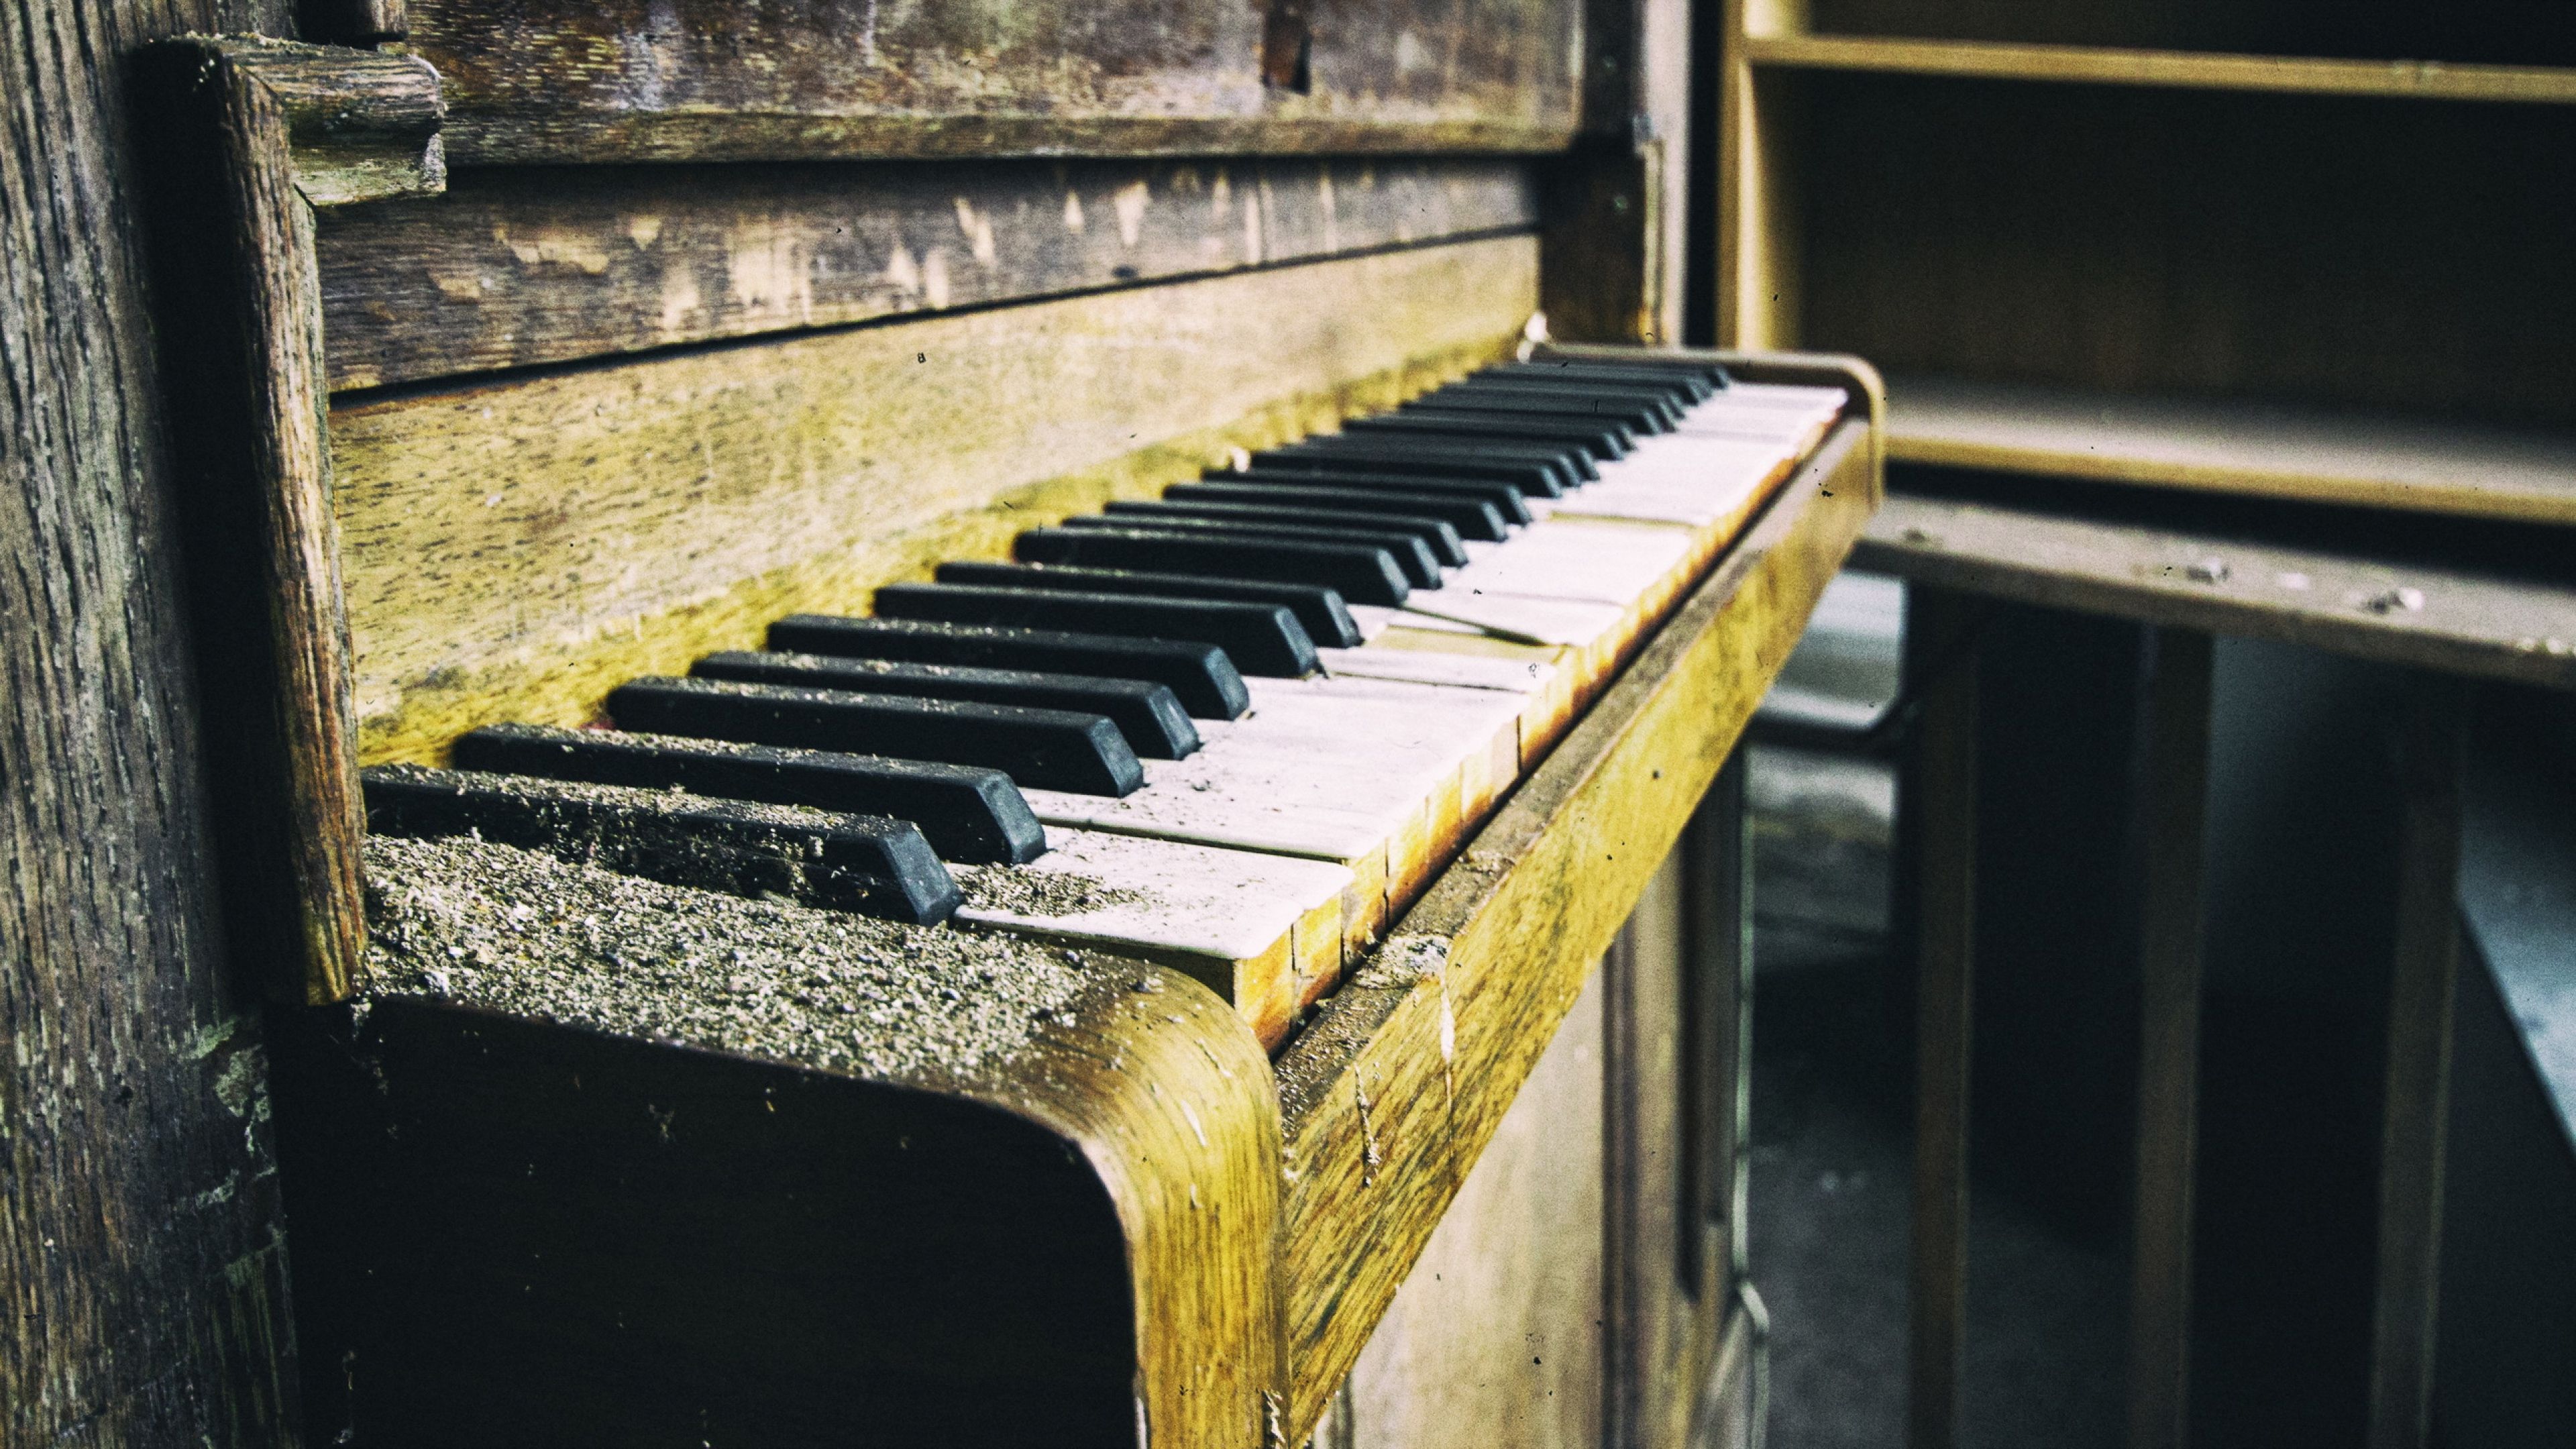 Piano Old, HD Music, 4k Wallpaper, Image, Background, Photo